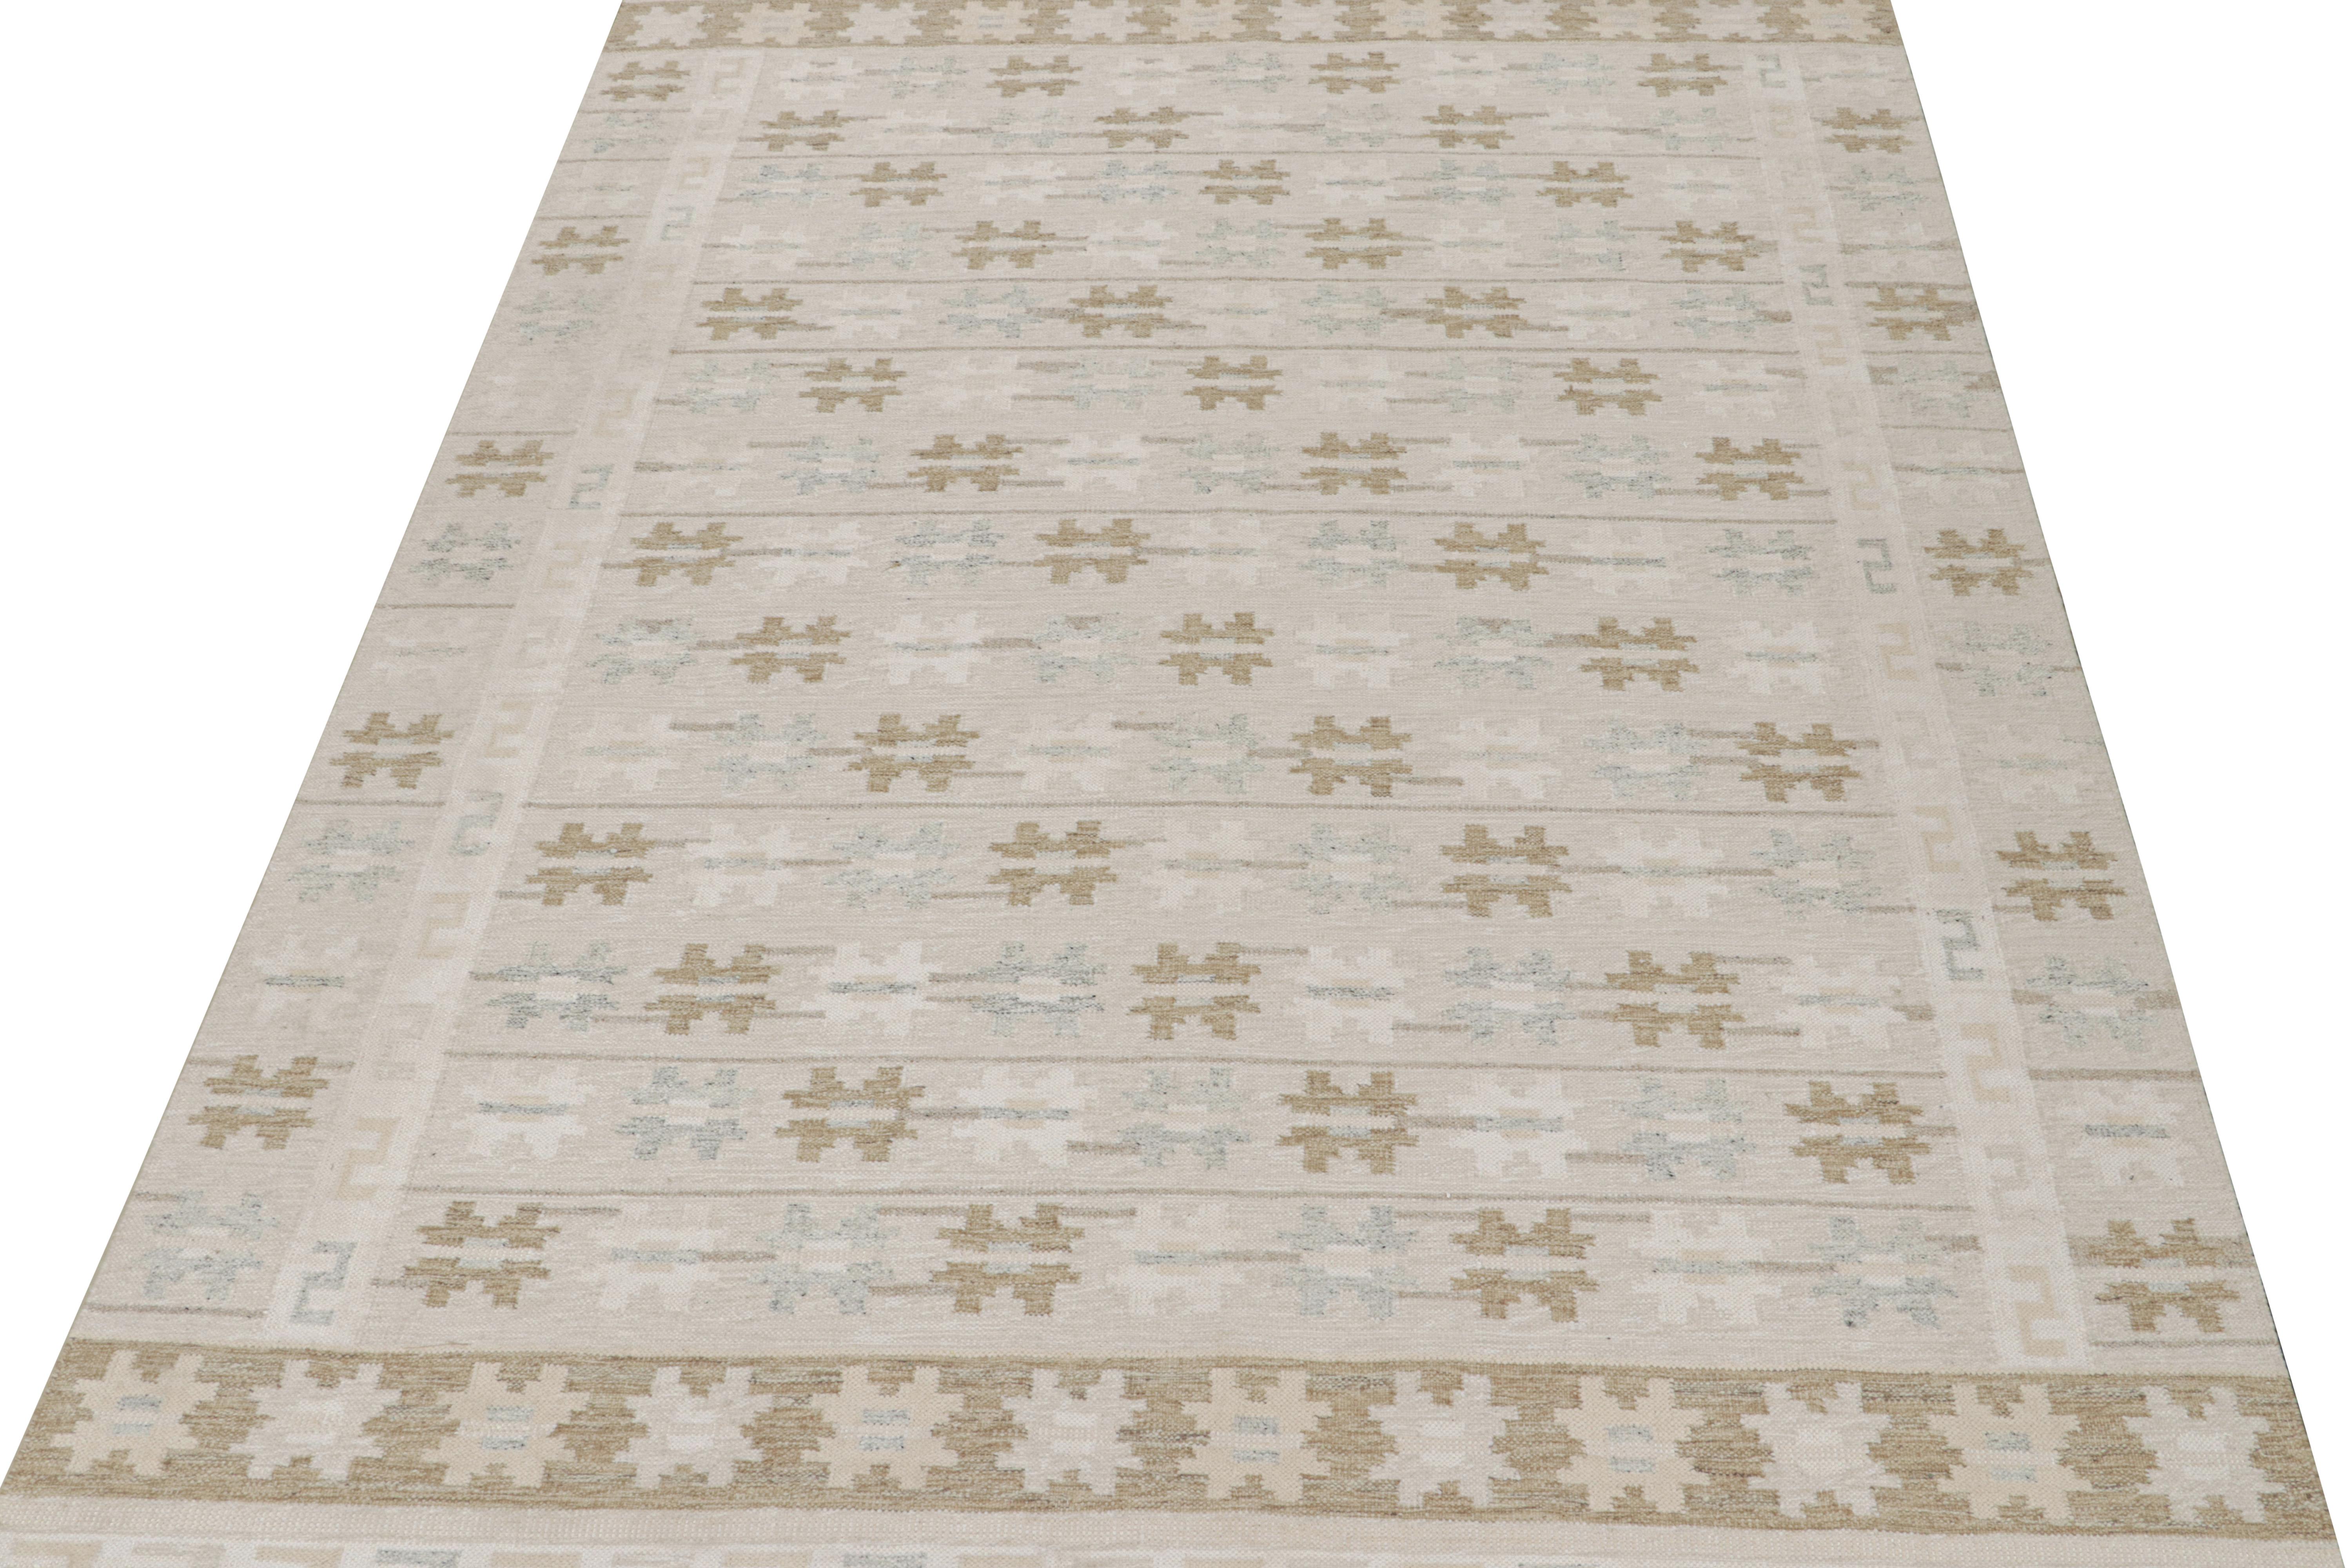 Hand-Knotted Rug & Kilim’s Scandinavian Style Kilim in Taupe & Beige-Brown Geometric Patterns For Sale